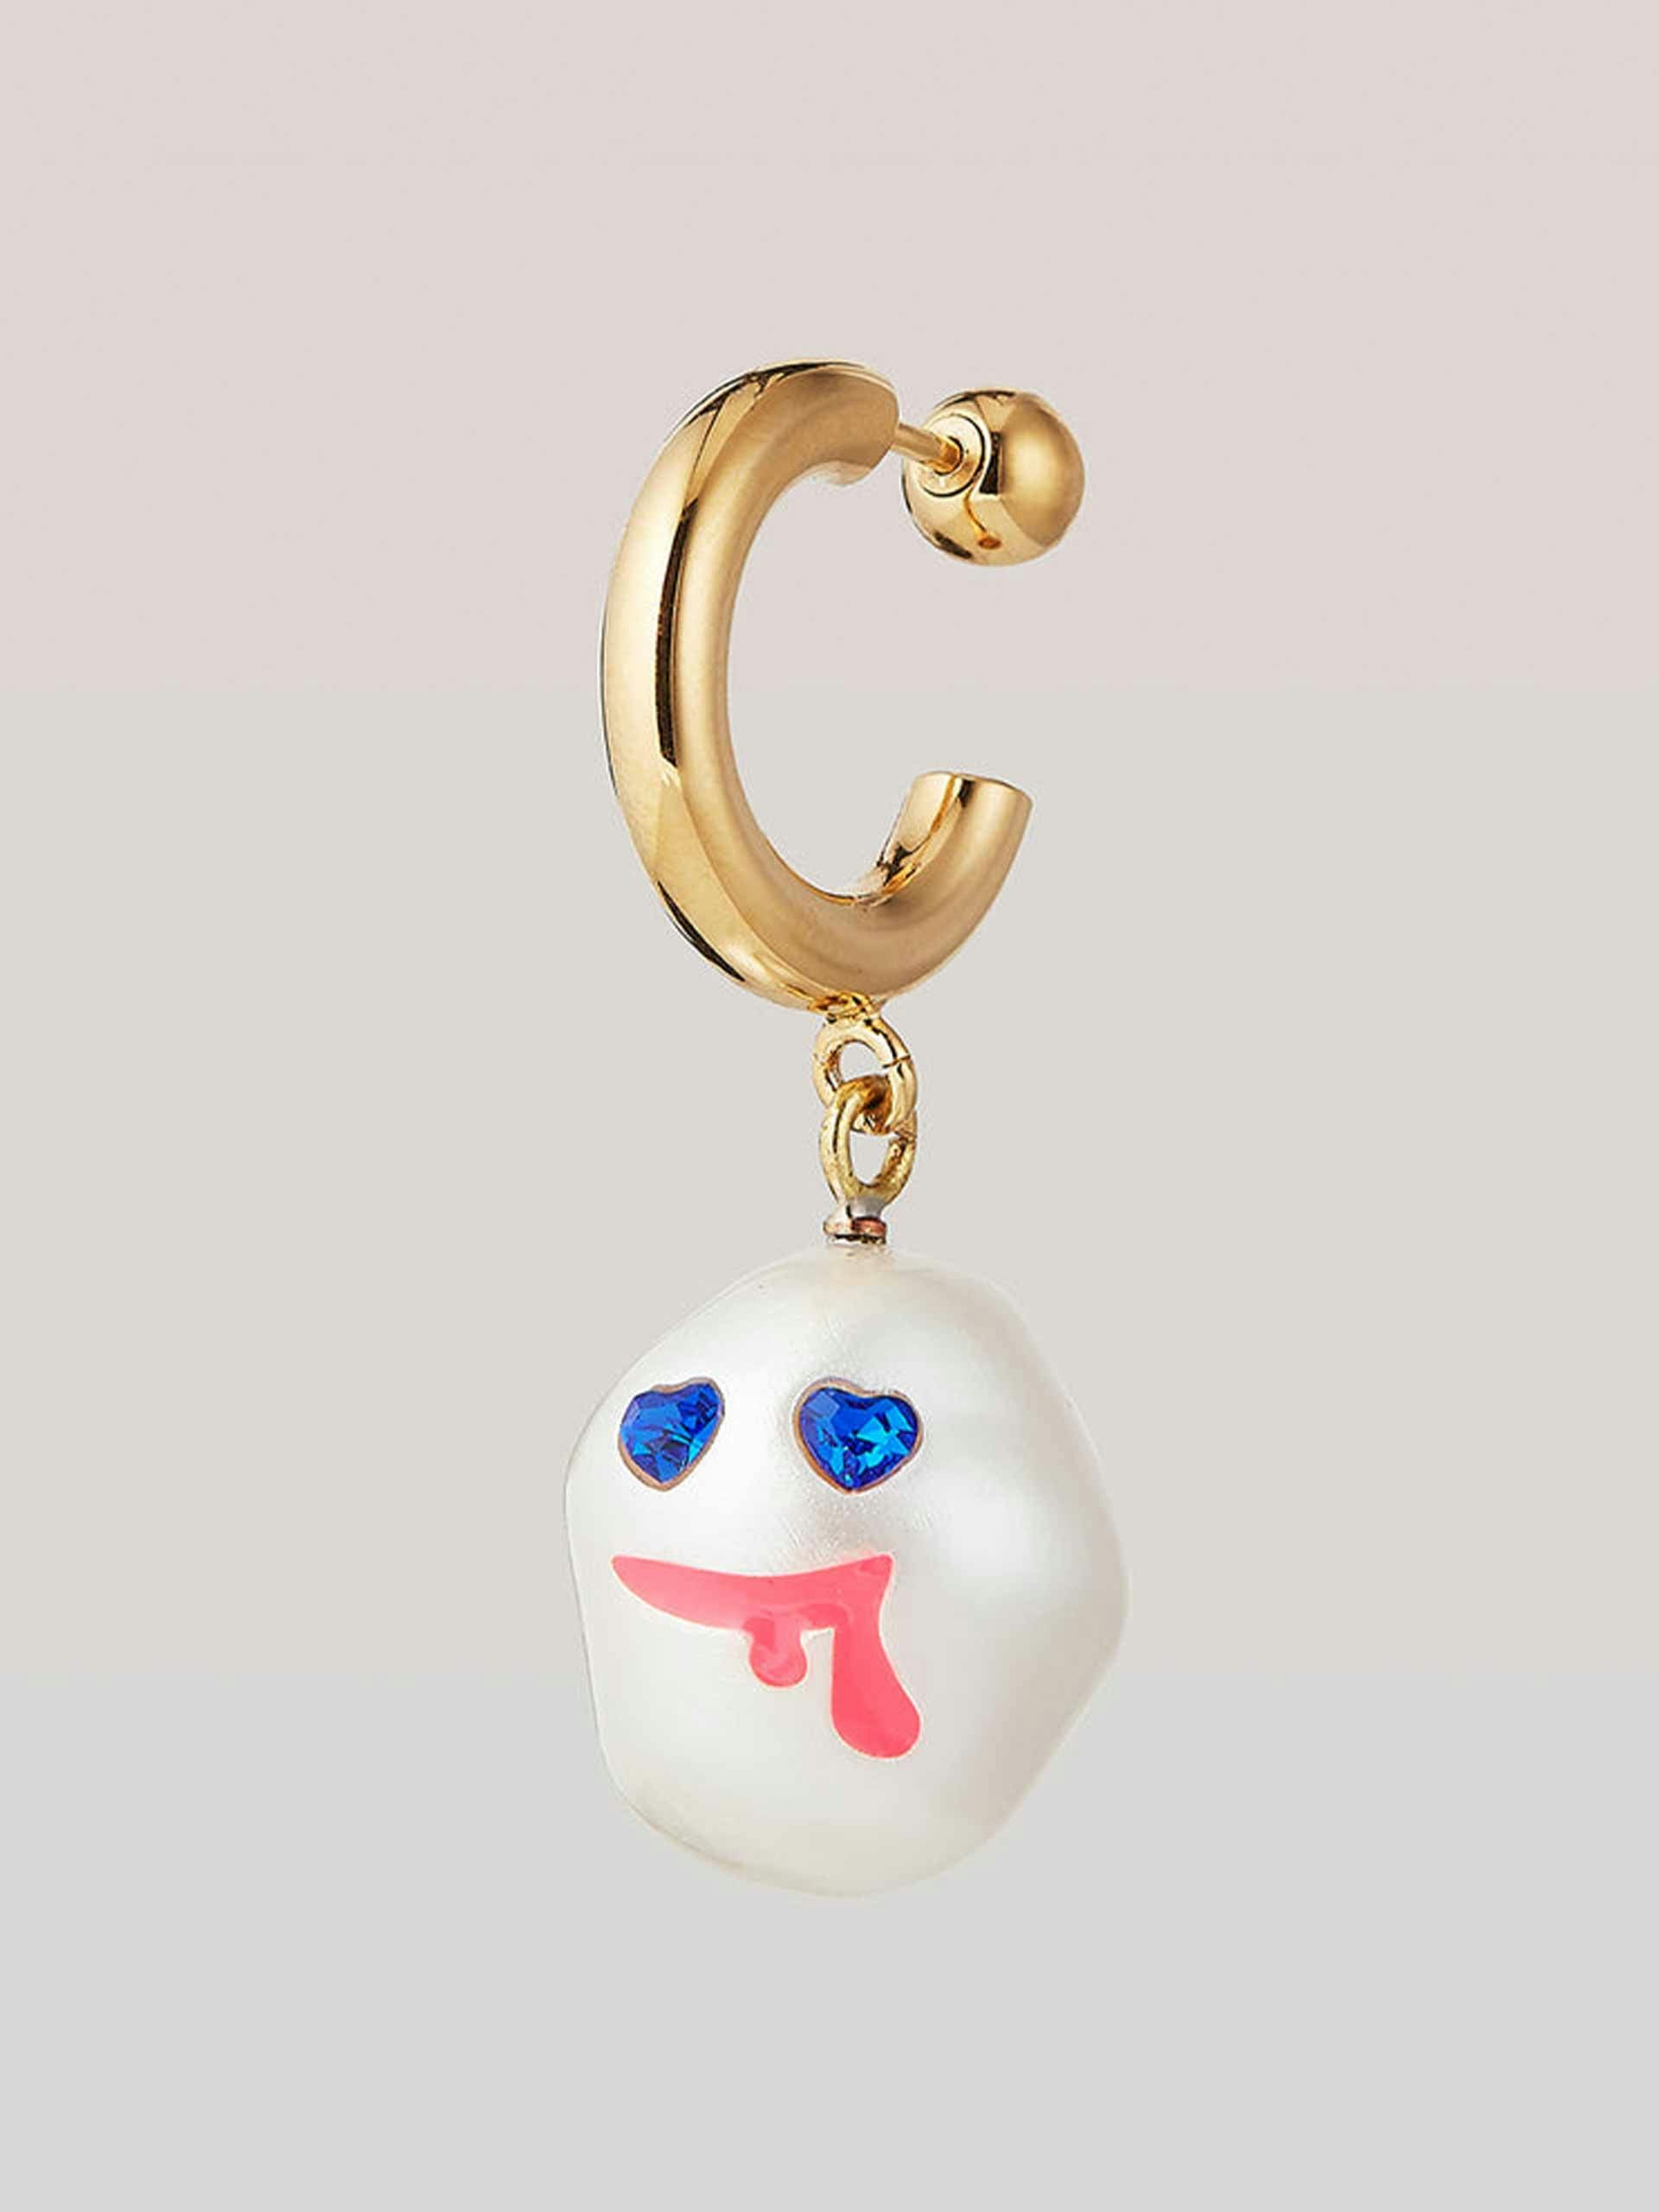 Drooling cotton-candy earring